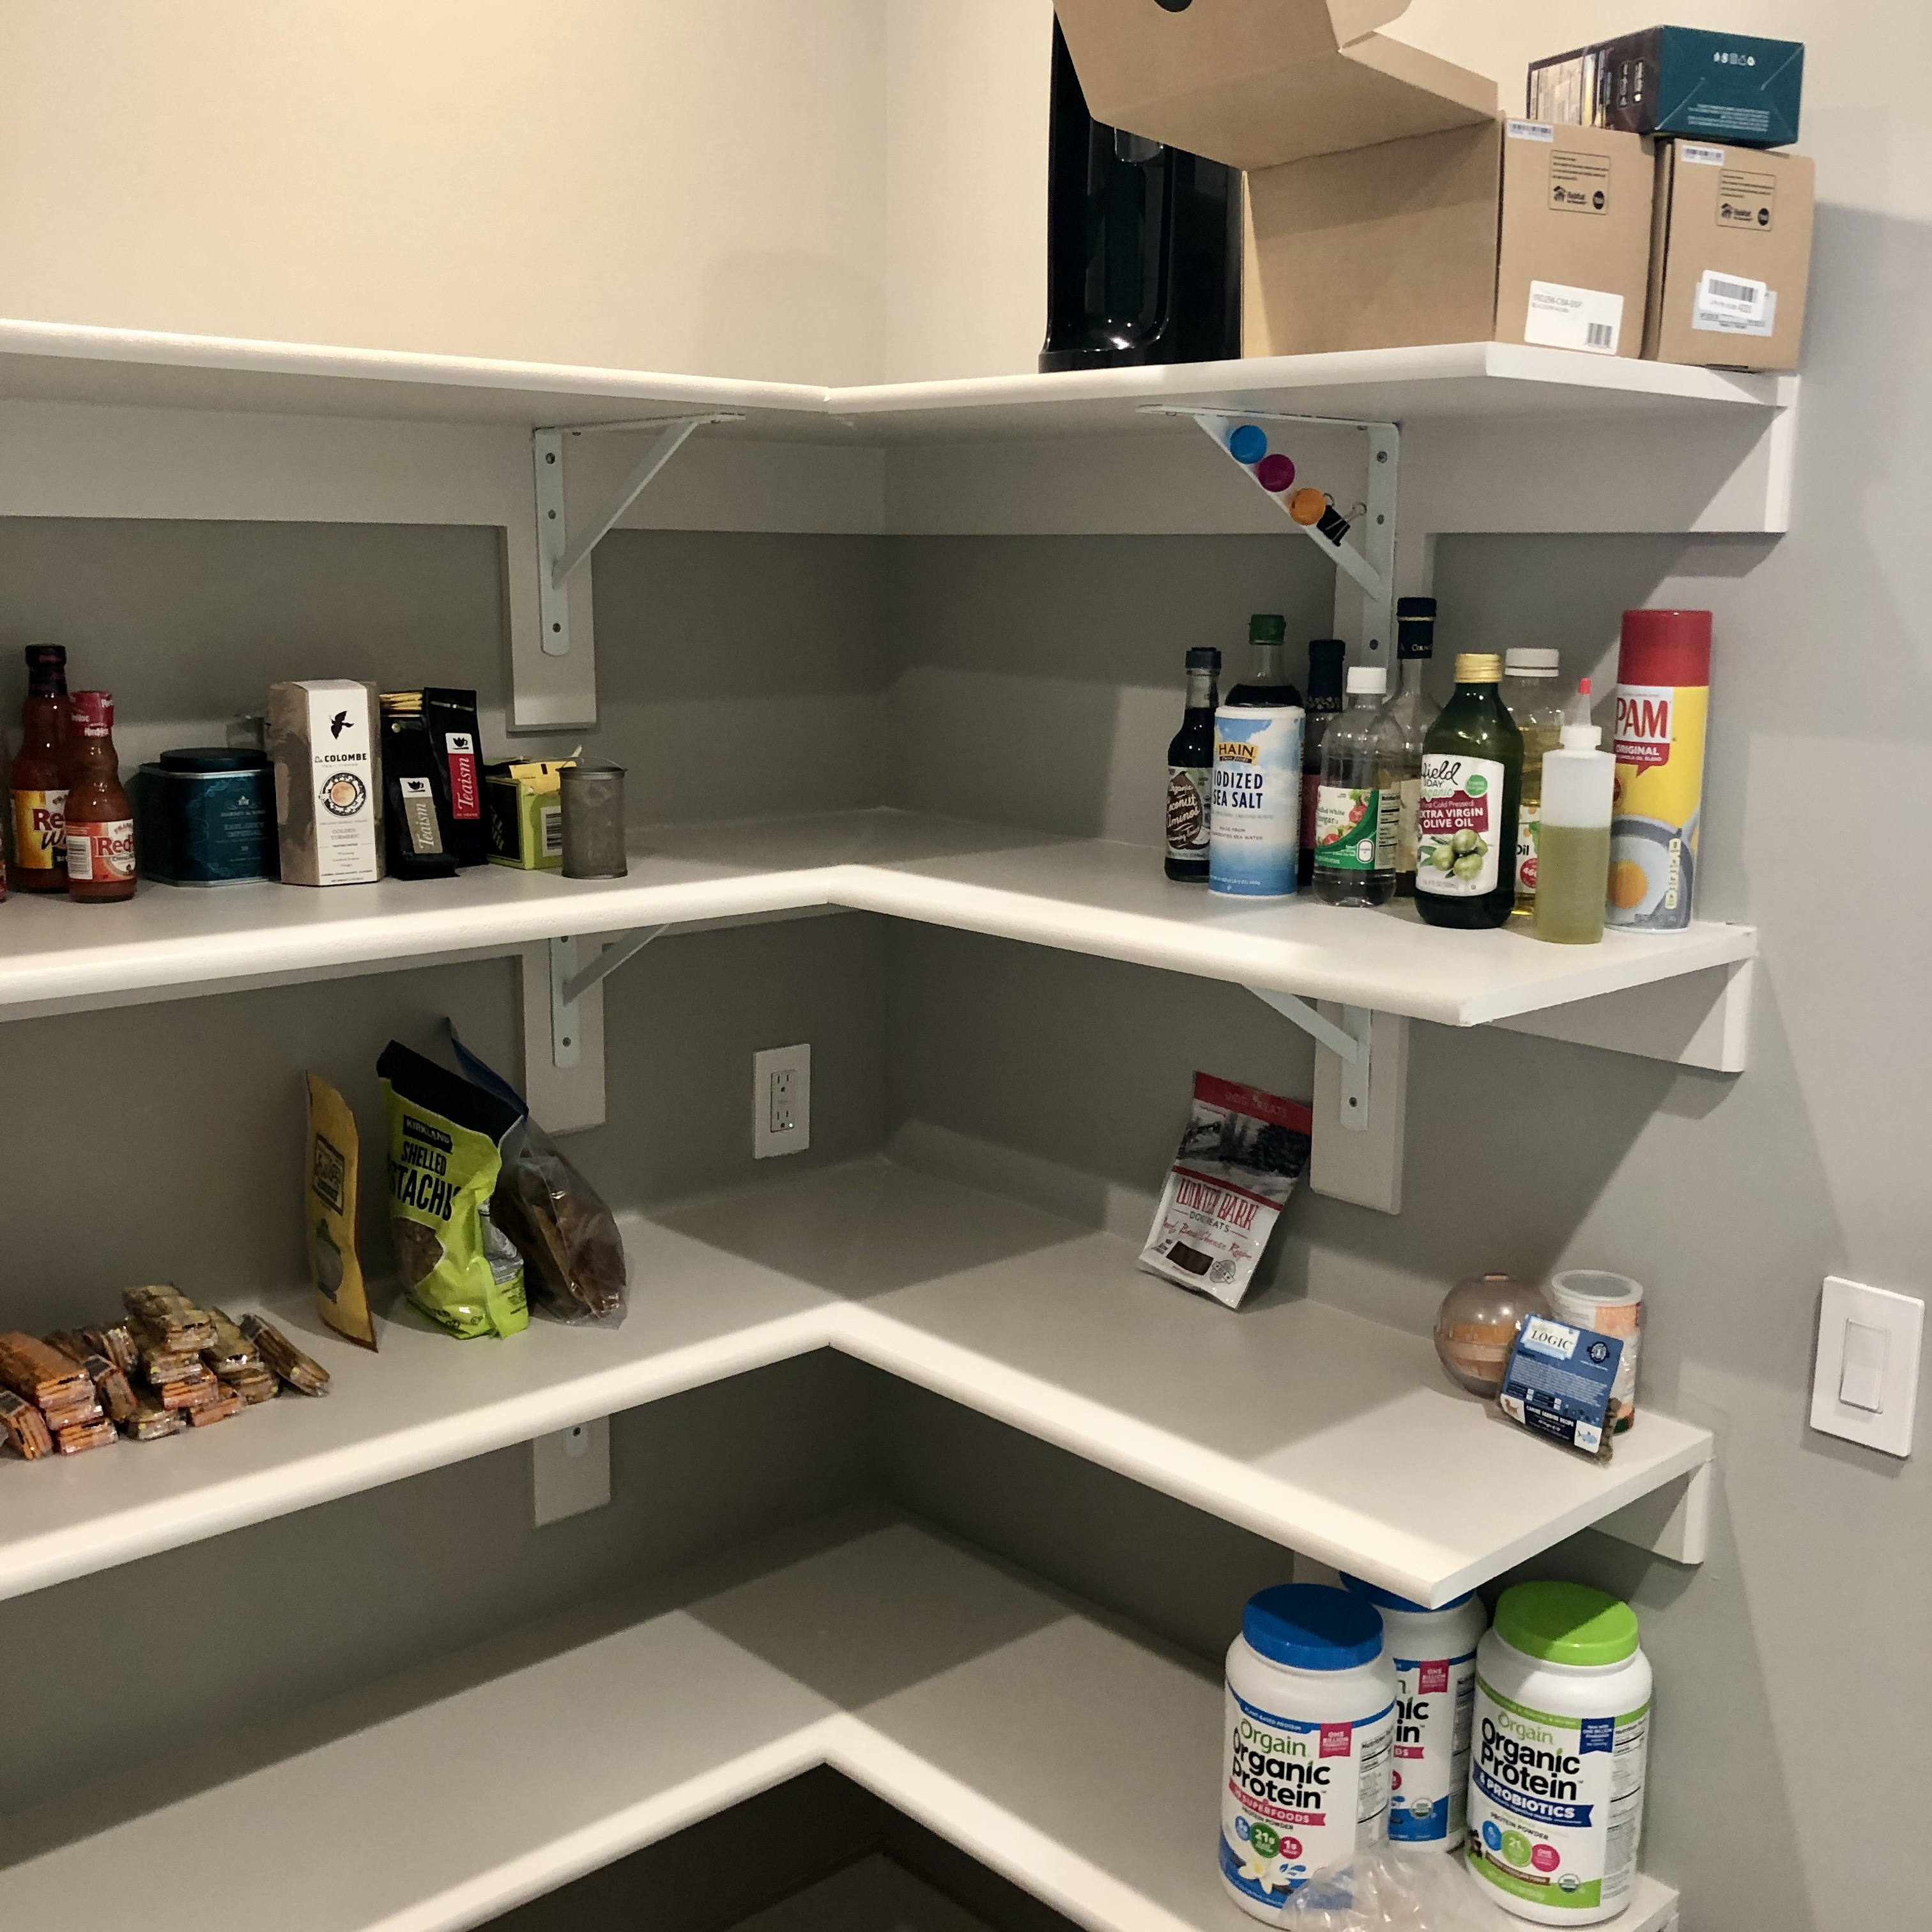 Disorganized kitchen pantry shows items scattered on shelves